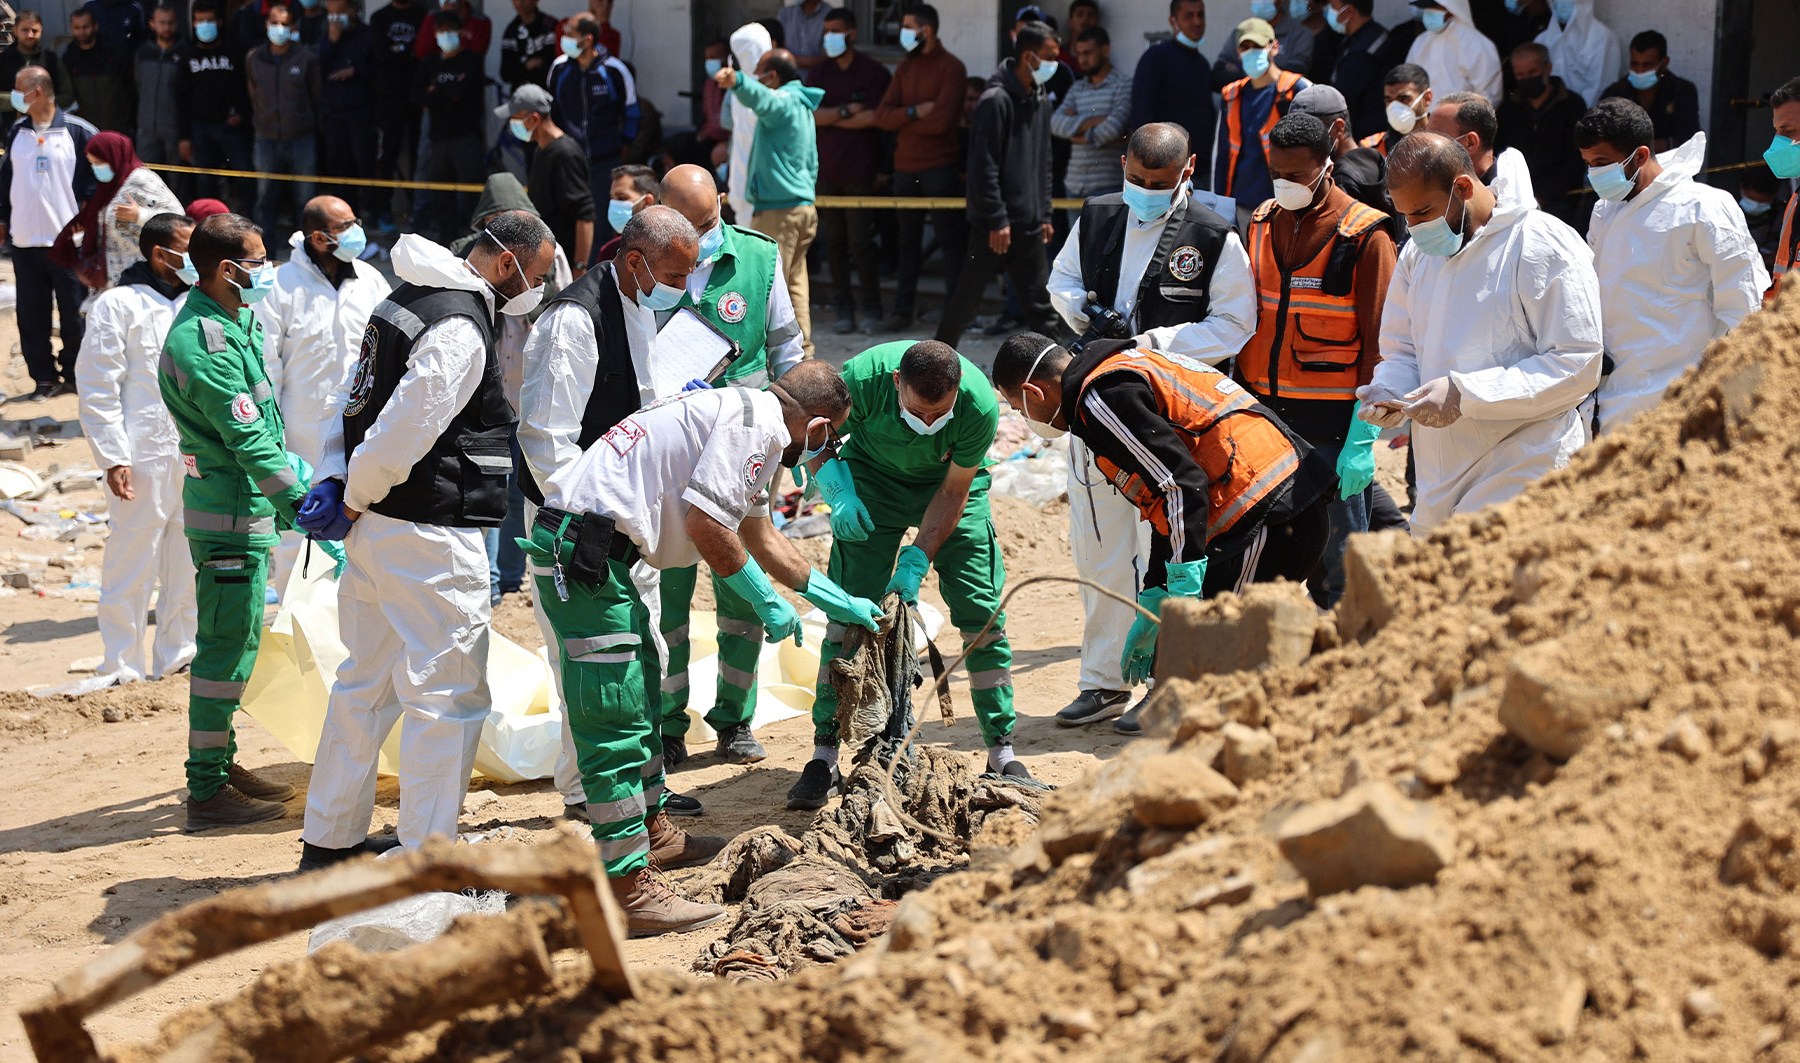 Mass grave discovered at Gaza hospital occupied by Israeli forces